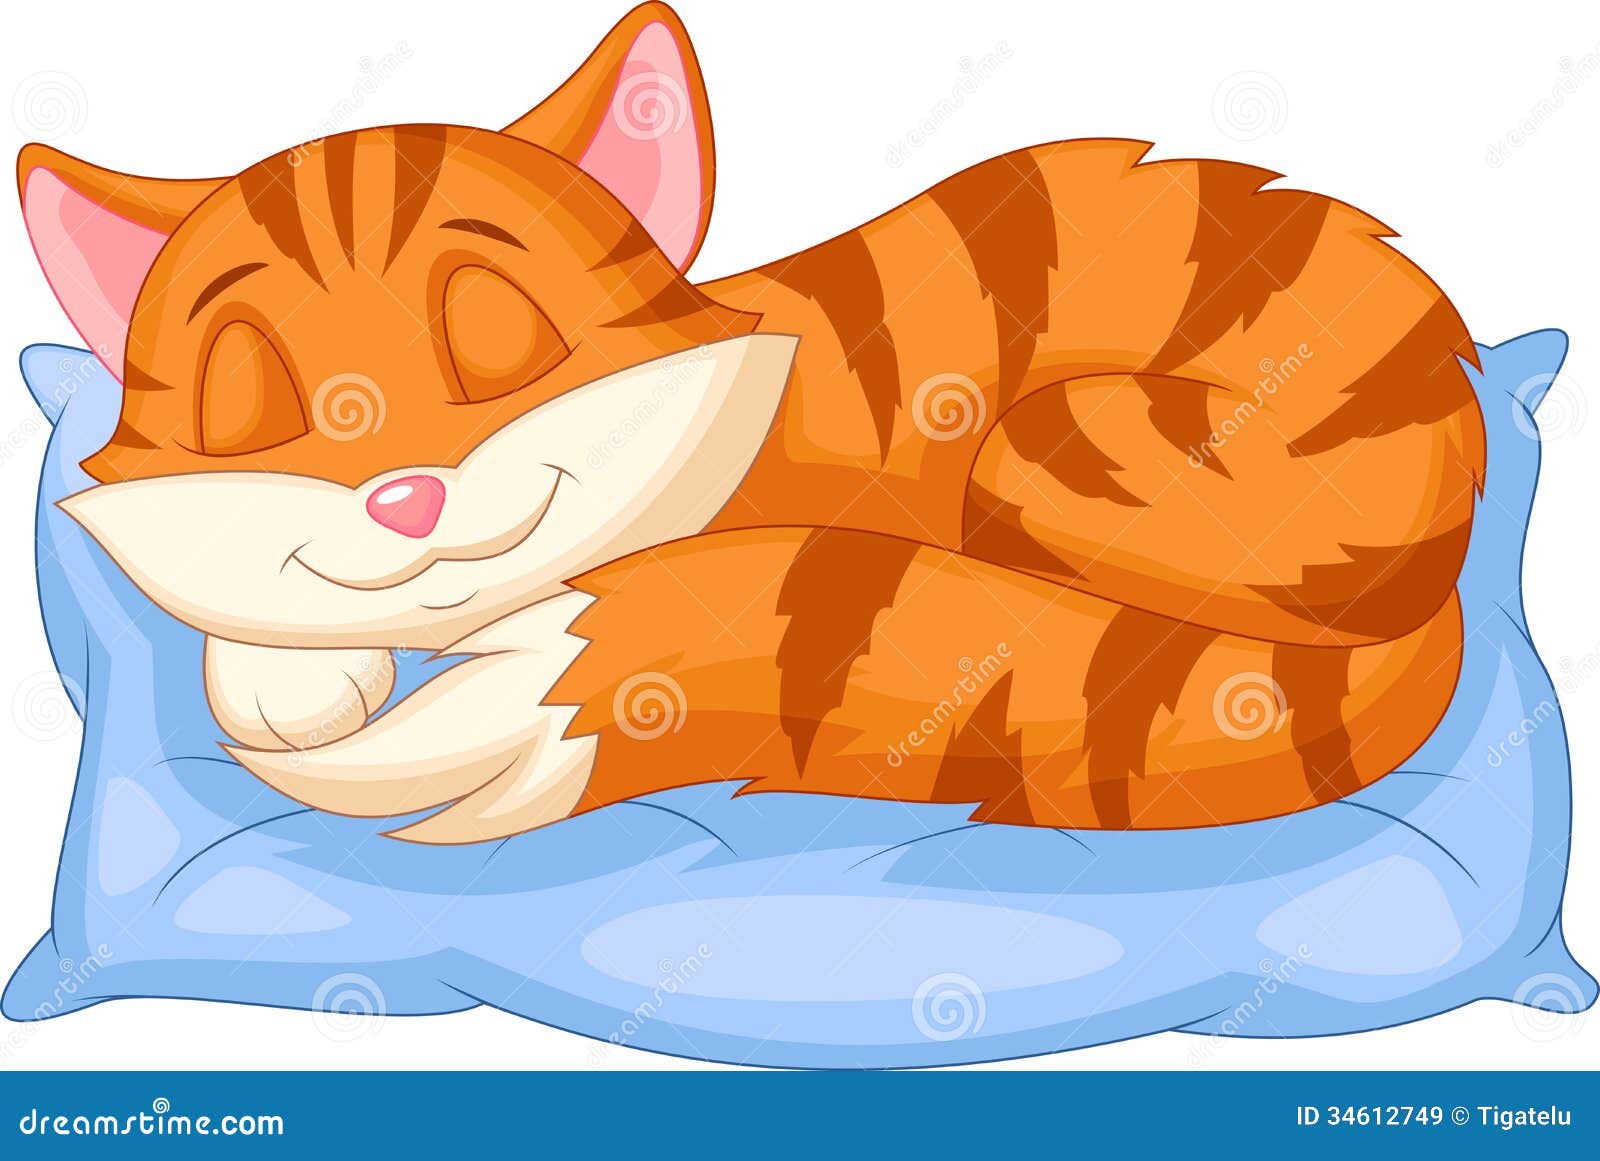 clipart cat bed - photo #50